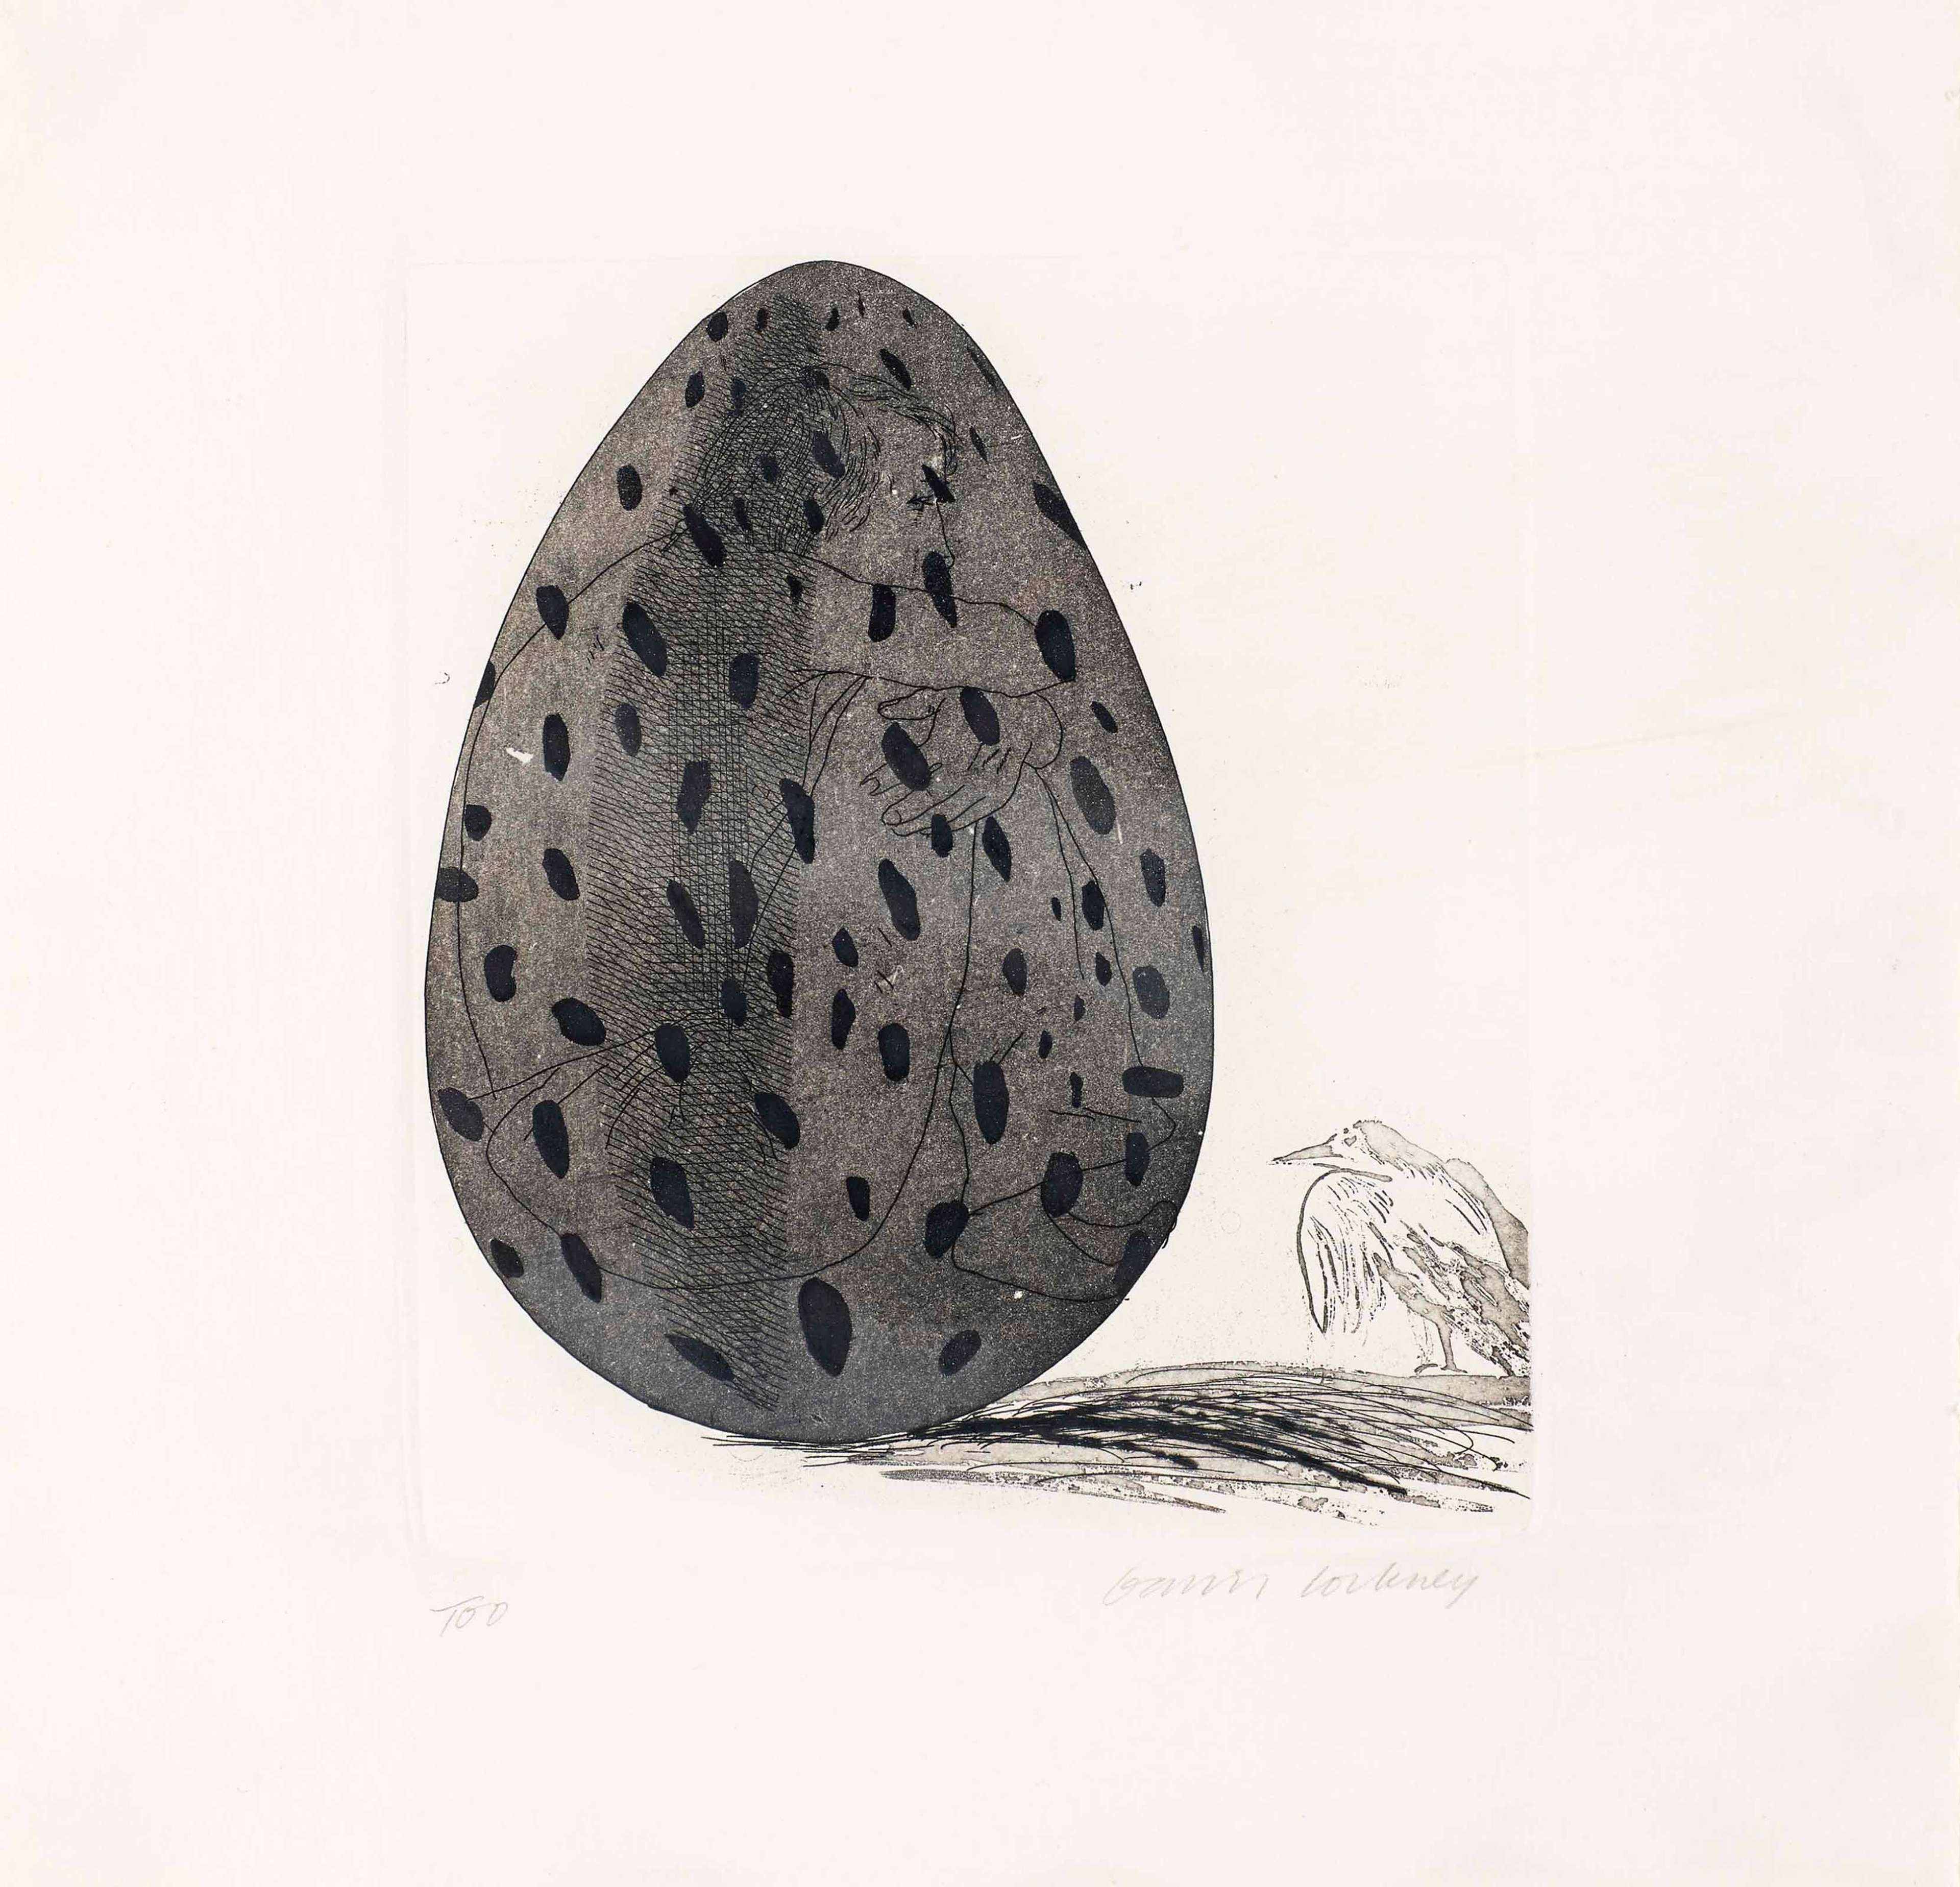 David Hockney’s The Boy Hidden In An Egg. An etching of a faint outline of a boy curled up inside a spotted egg with a bird to the lower right of the egg.